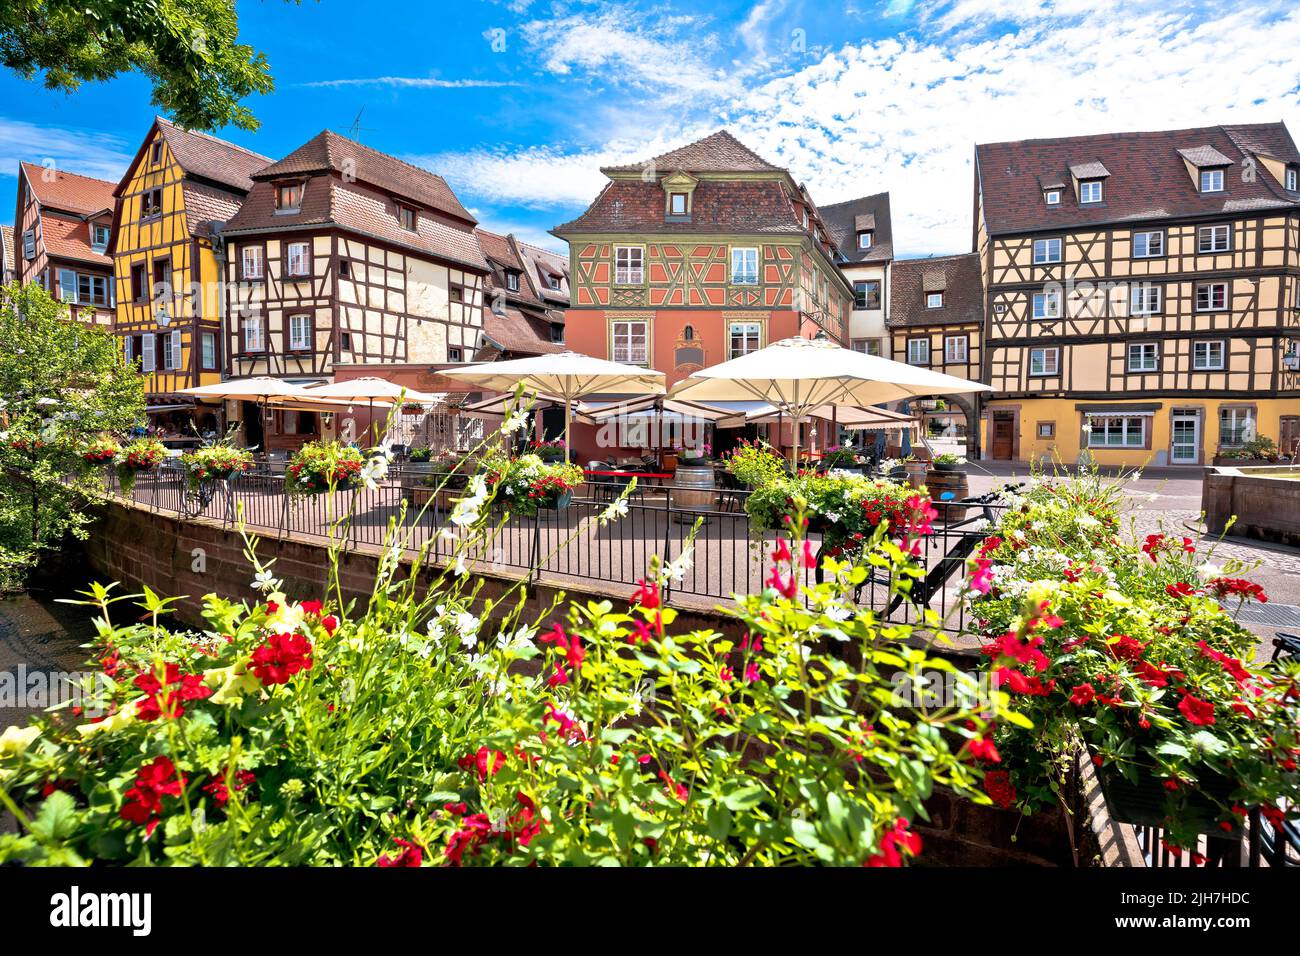 Town of Colmar colorful architecture and canal view, Alsace region of France Stock Photo